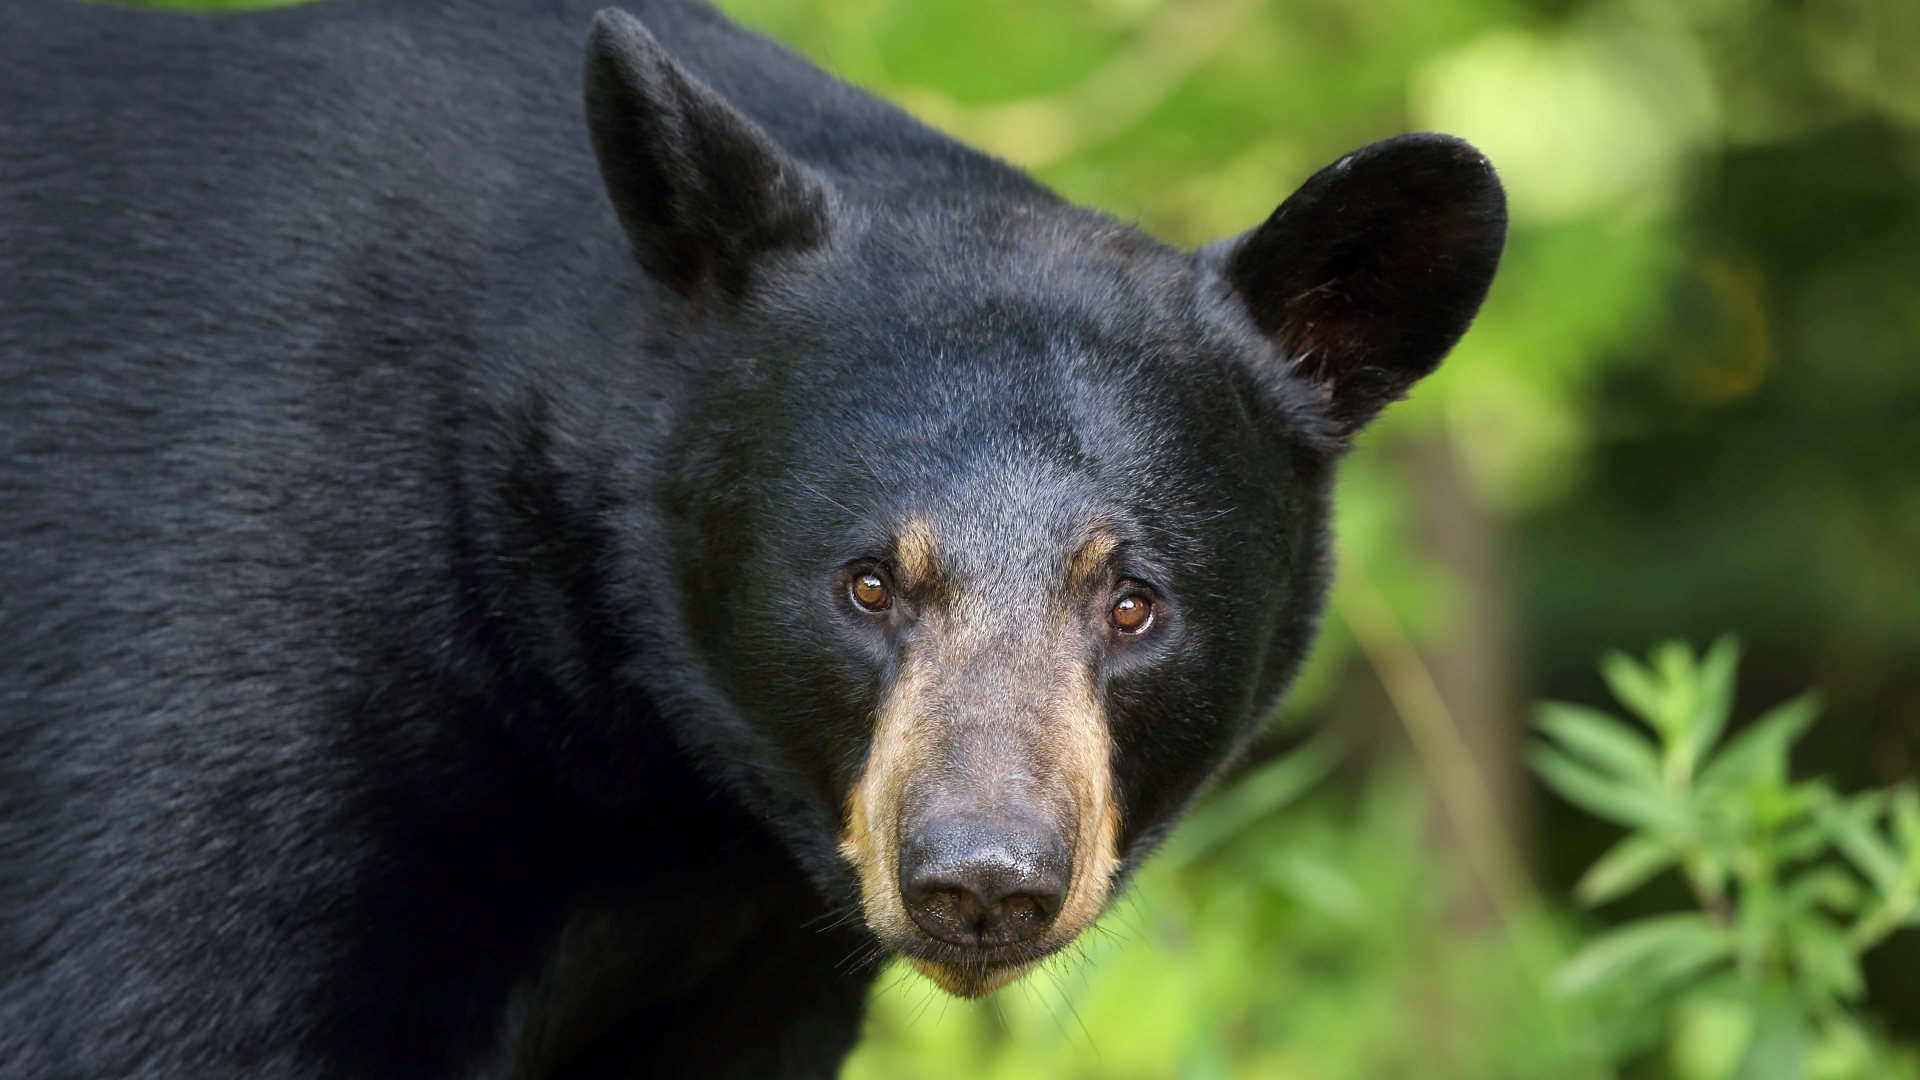 Black bears: The most common bear in North America | Live Science